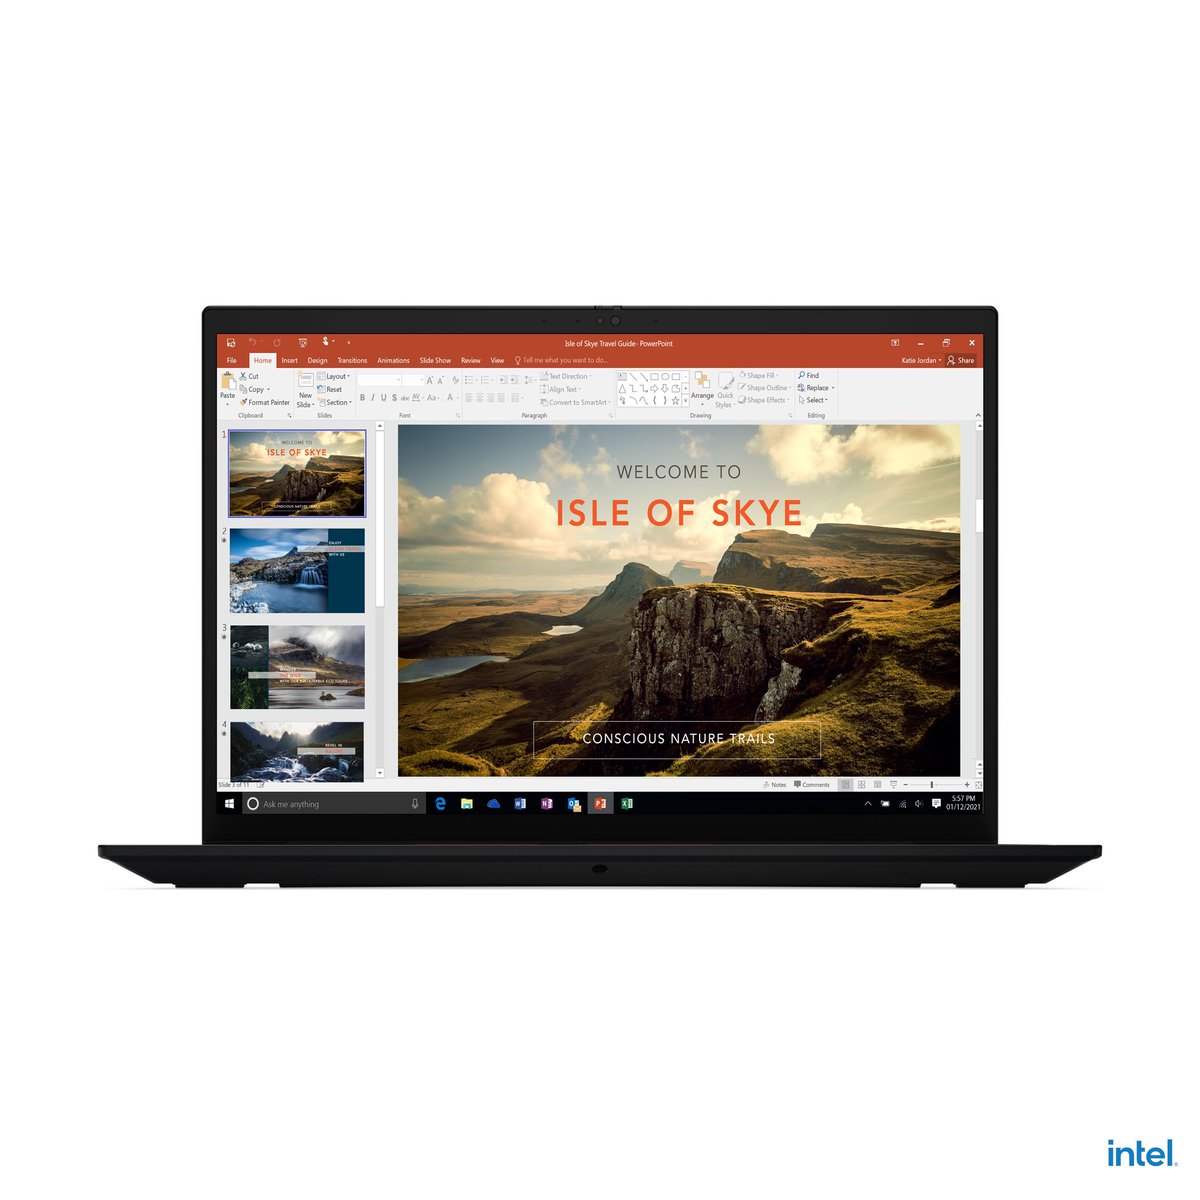 Lenovo’s new ThinkPad X1 Extreme Gen 4 launches in August for $2,149